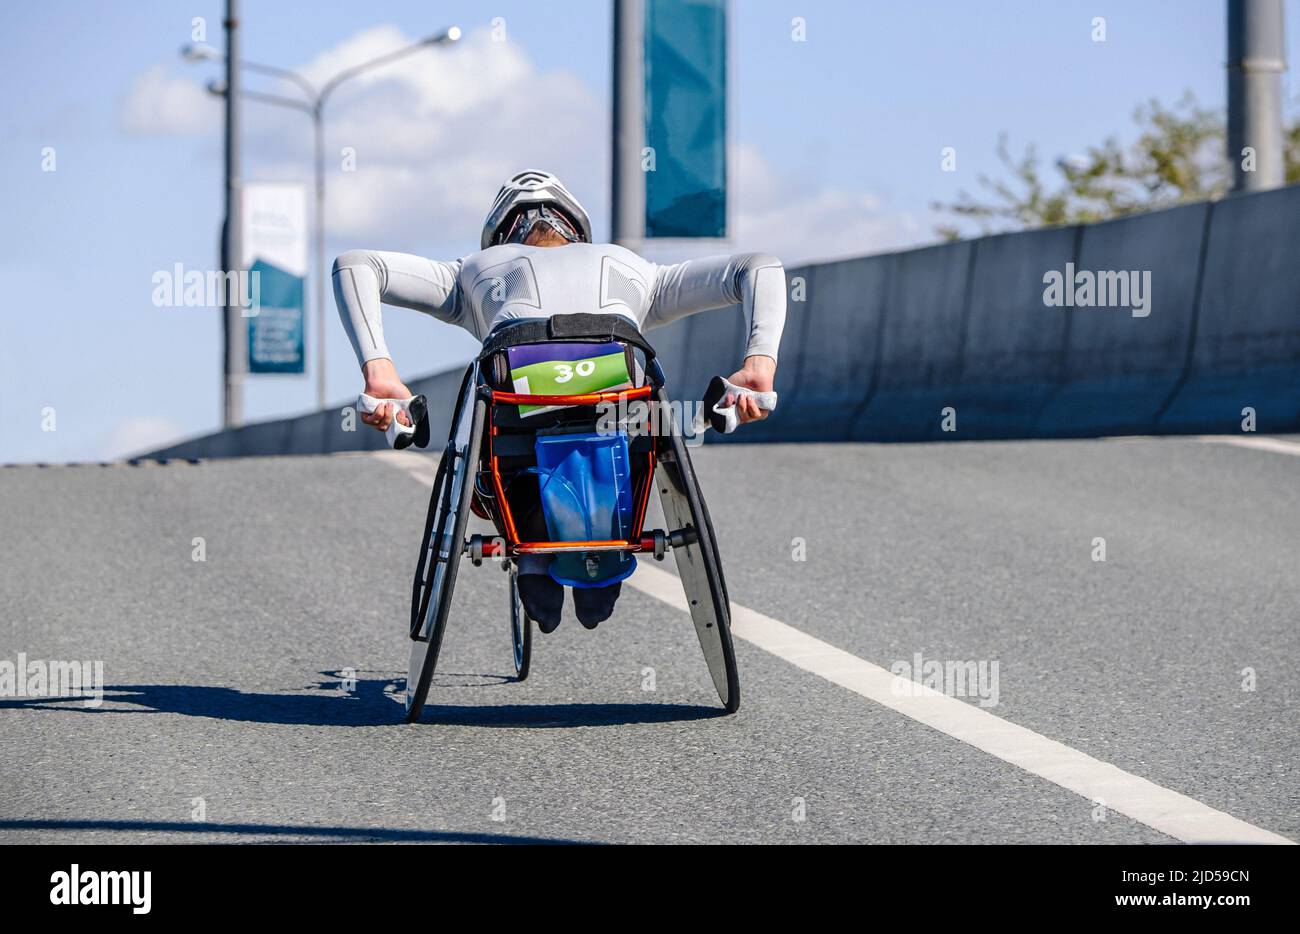 disabled athlete on racing wheelchair in marathon race Stock Photo